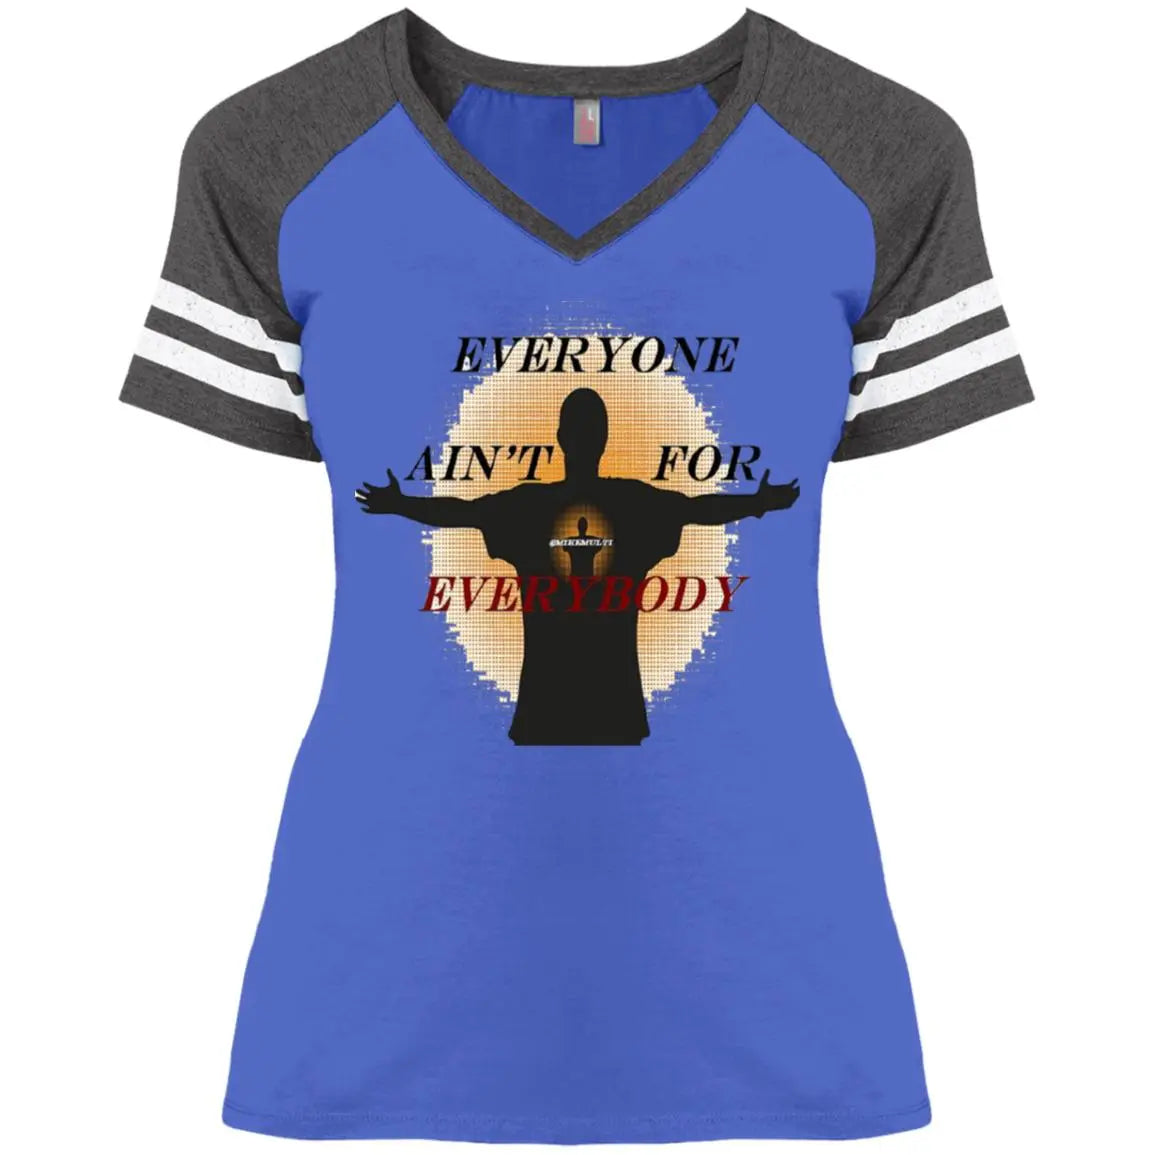 Everyone Ain't For Everybody - Ladies' Game V-Neck T-Shirt CustomCat